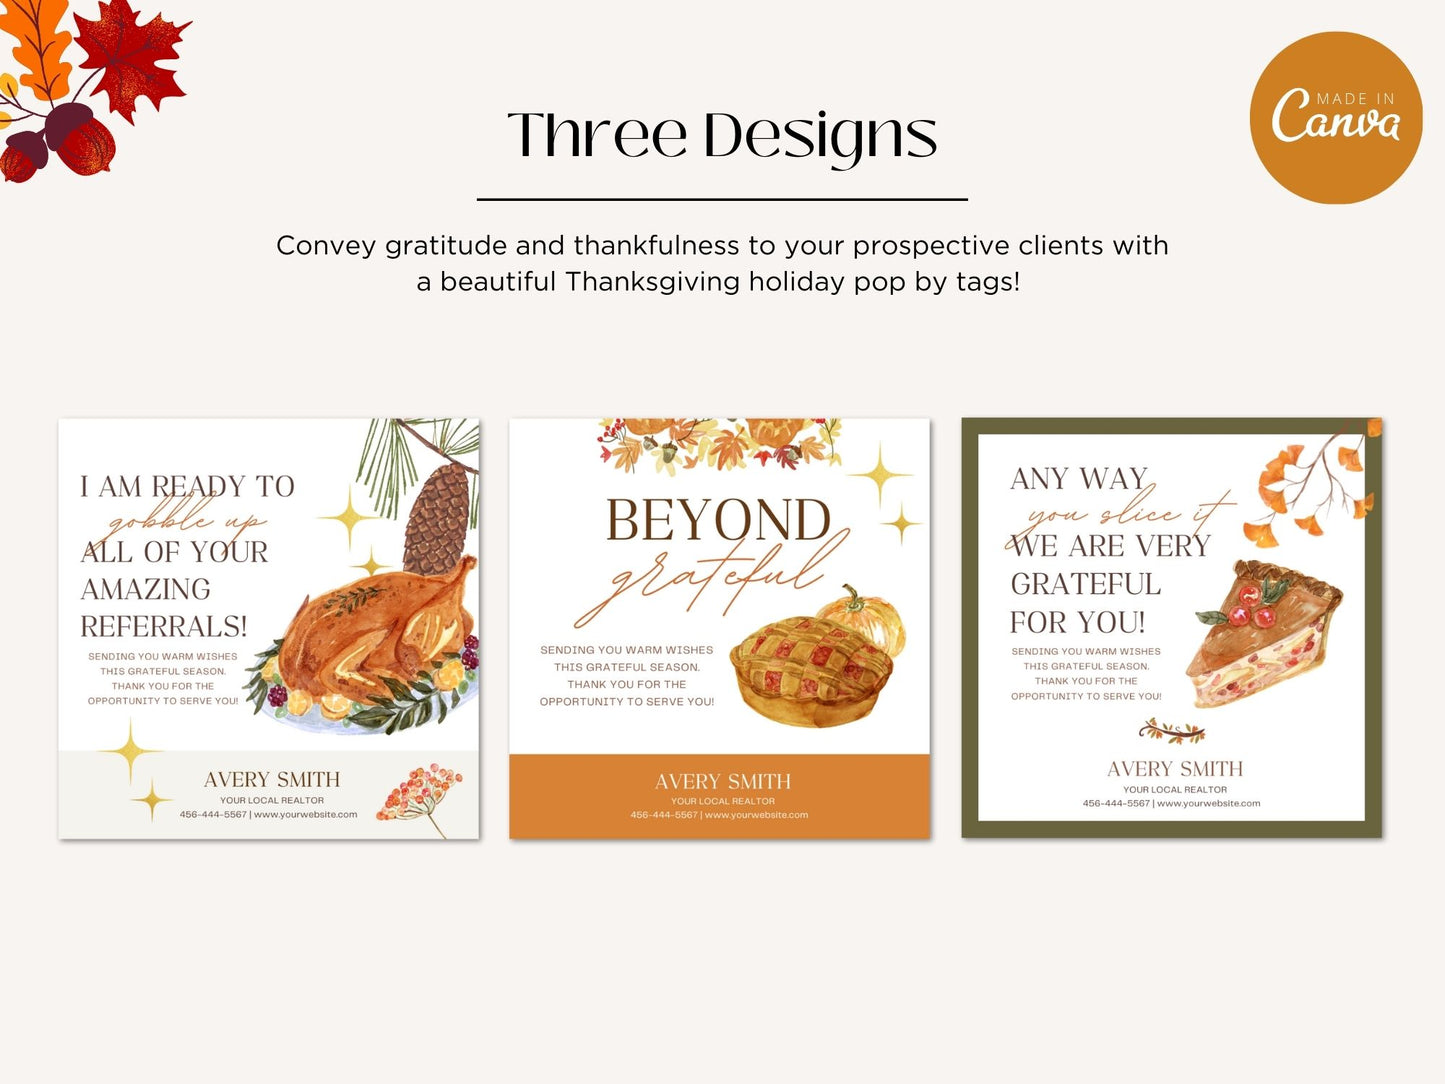 Real Estate Thanksgiving Pop By Tag Square Bundle - Personalize your pop-by gifts with these square tags, expressing gratitude and fostering connections with clients during the Thanksgiving holiday season.